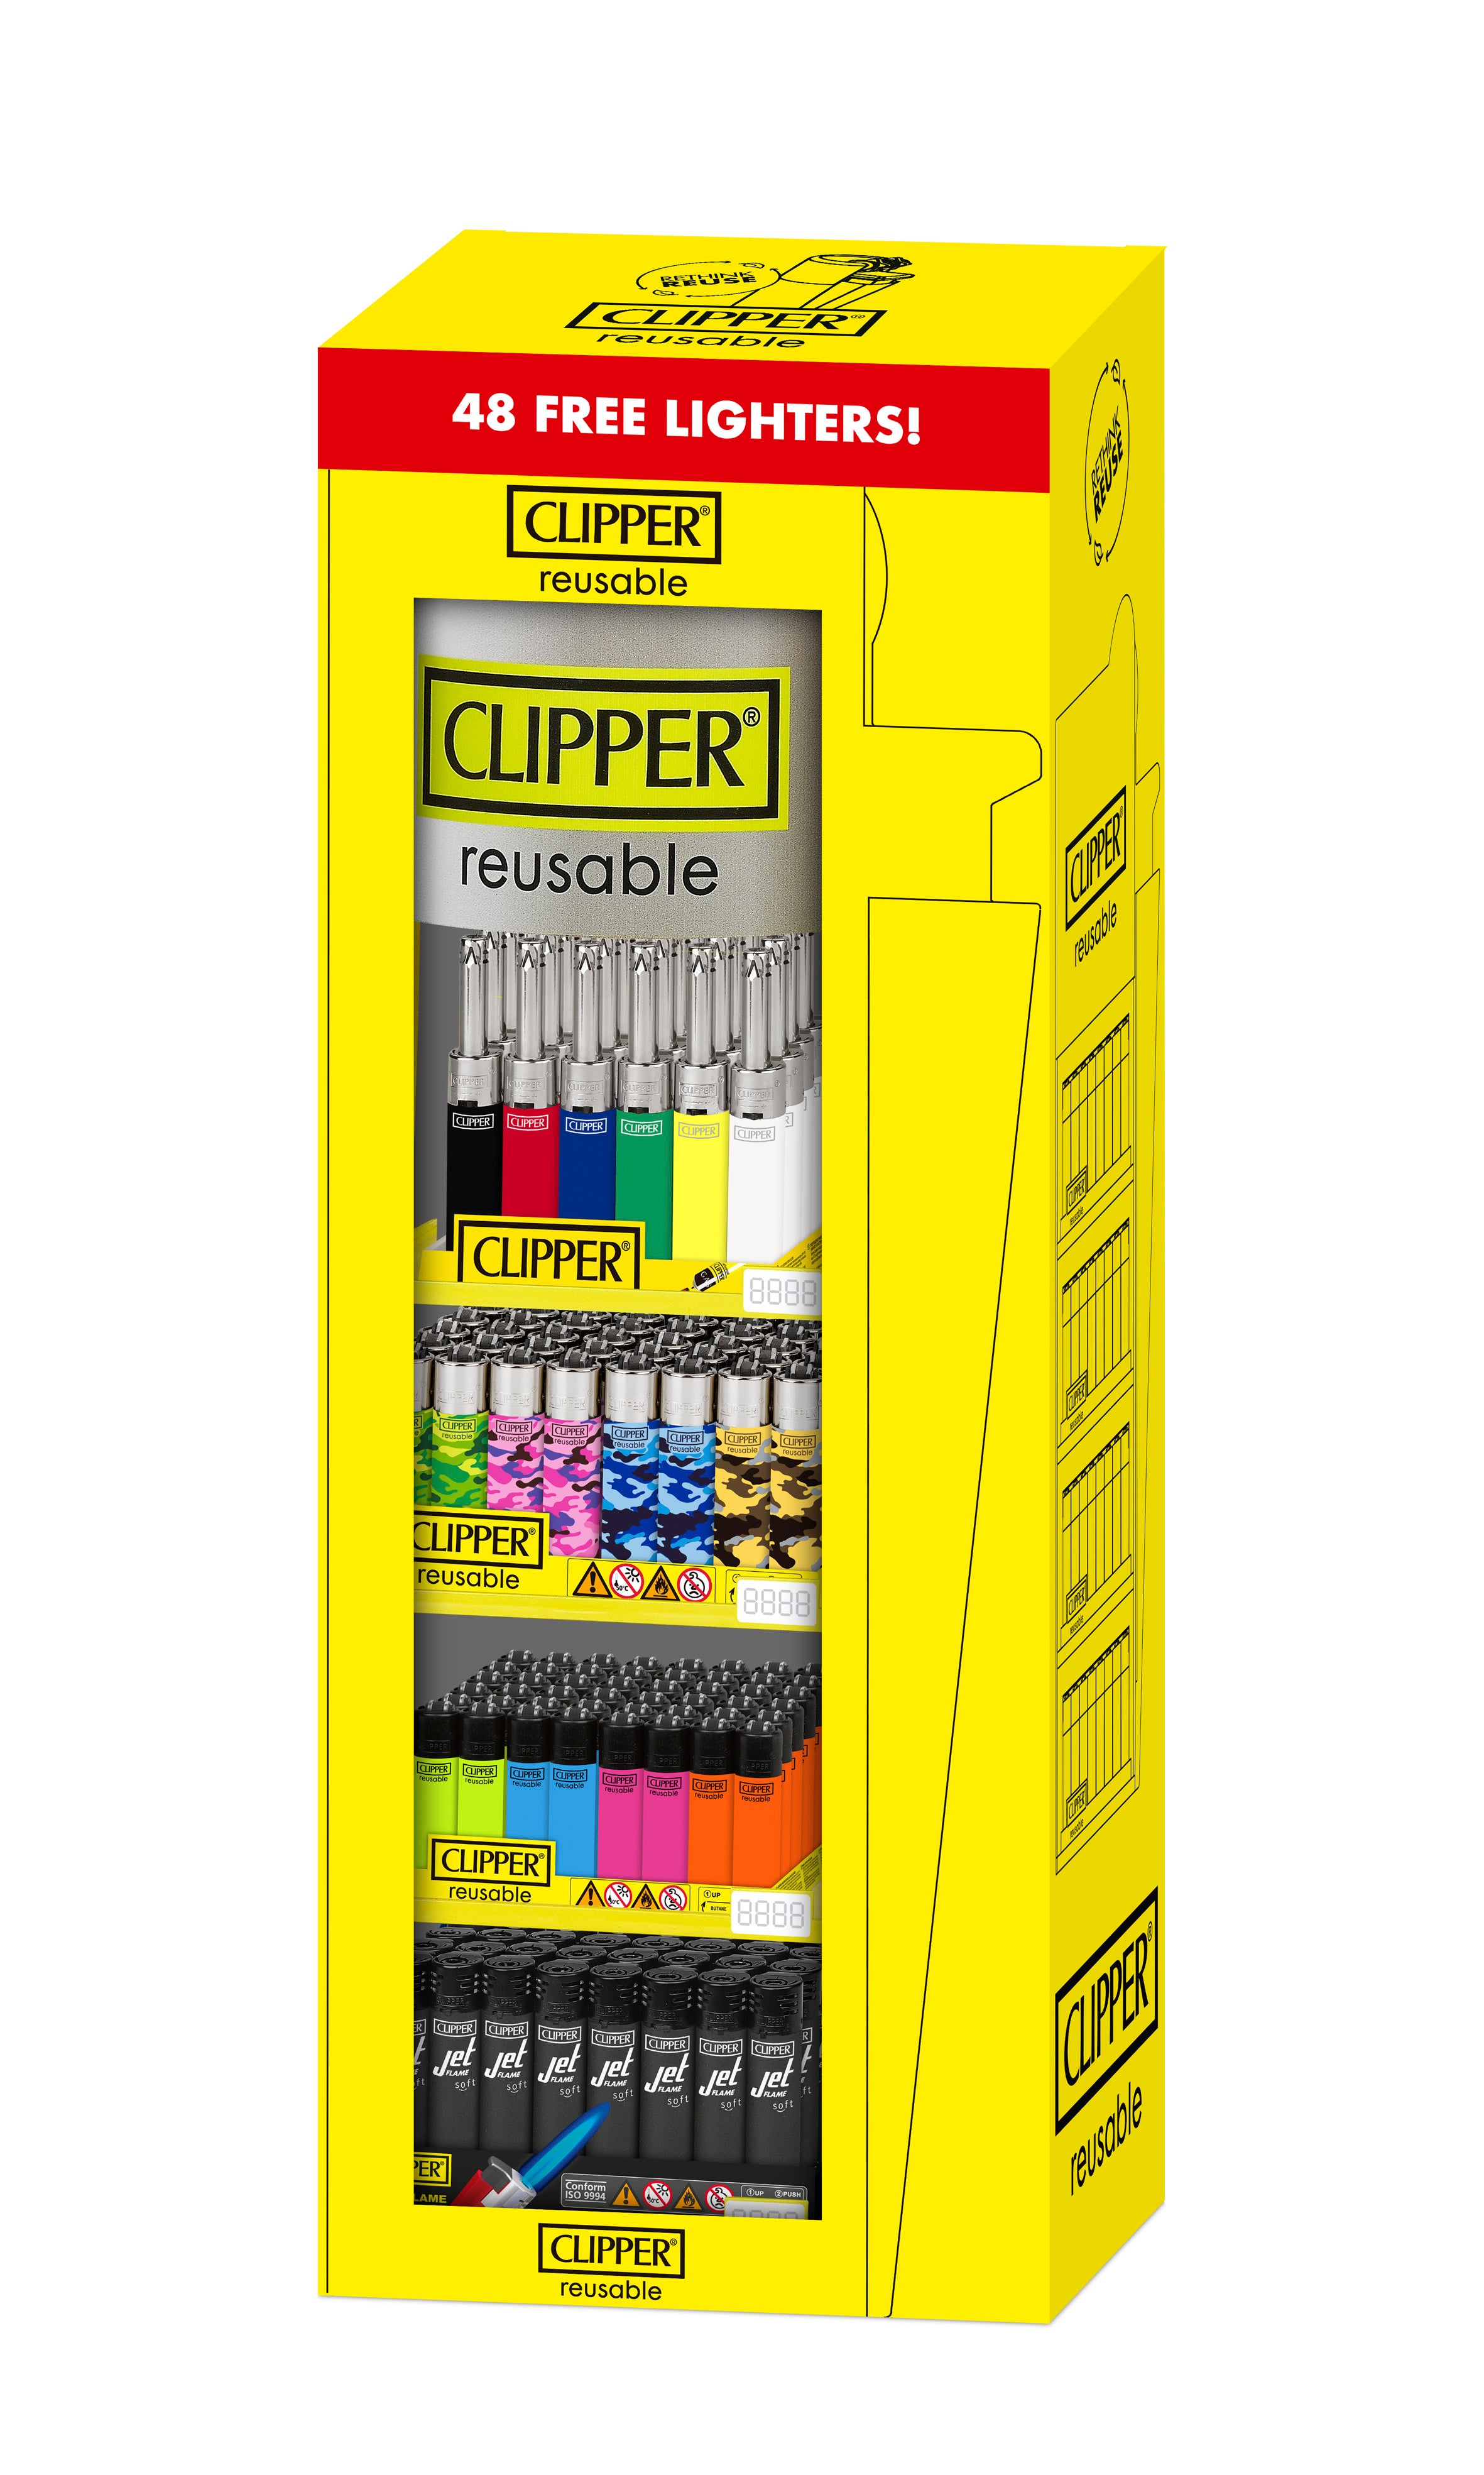 CLIPPER LIGHTERS 4-TIER MIXED DISPLAY+FREE TRAY 168CT